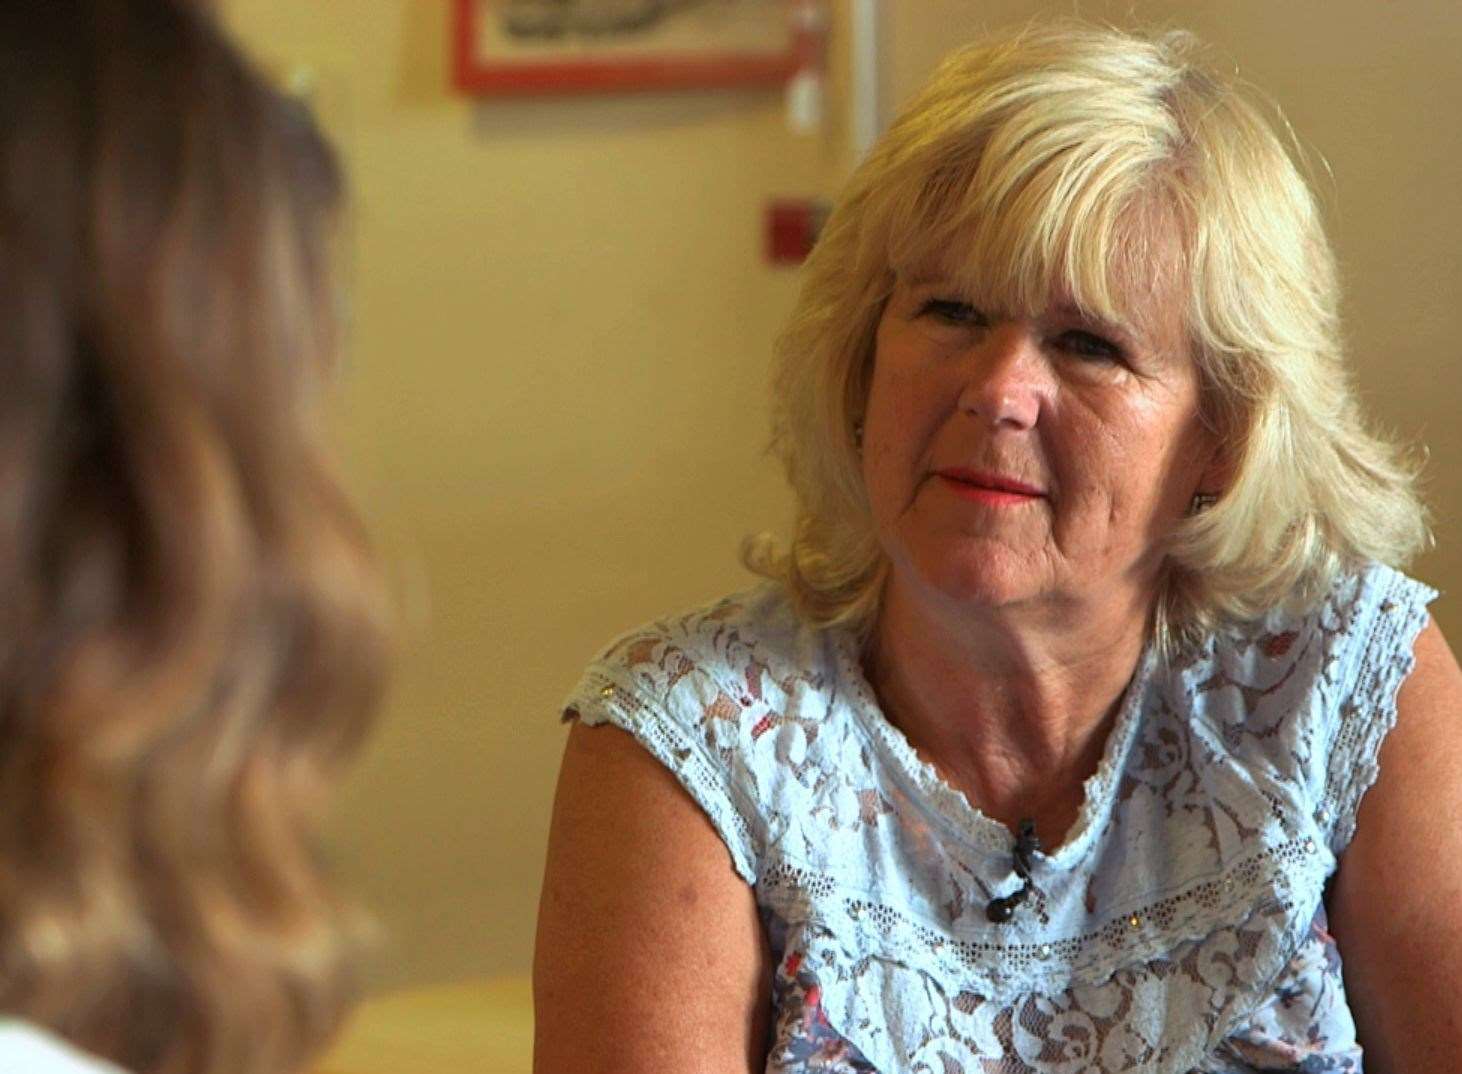 Tracy Carr and the wellbeing cafe which she founded will feature in a TV documentary tonight